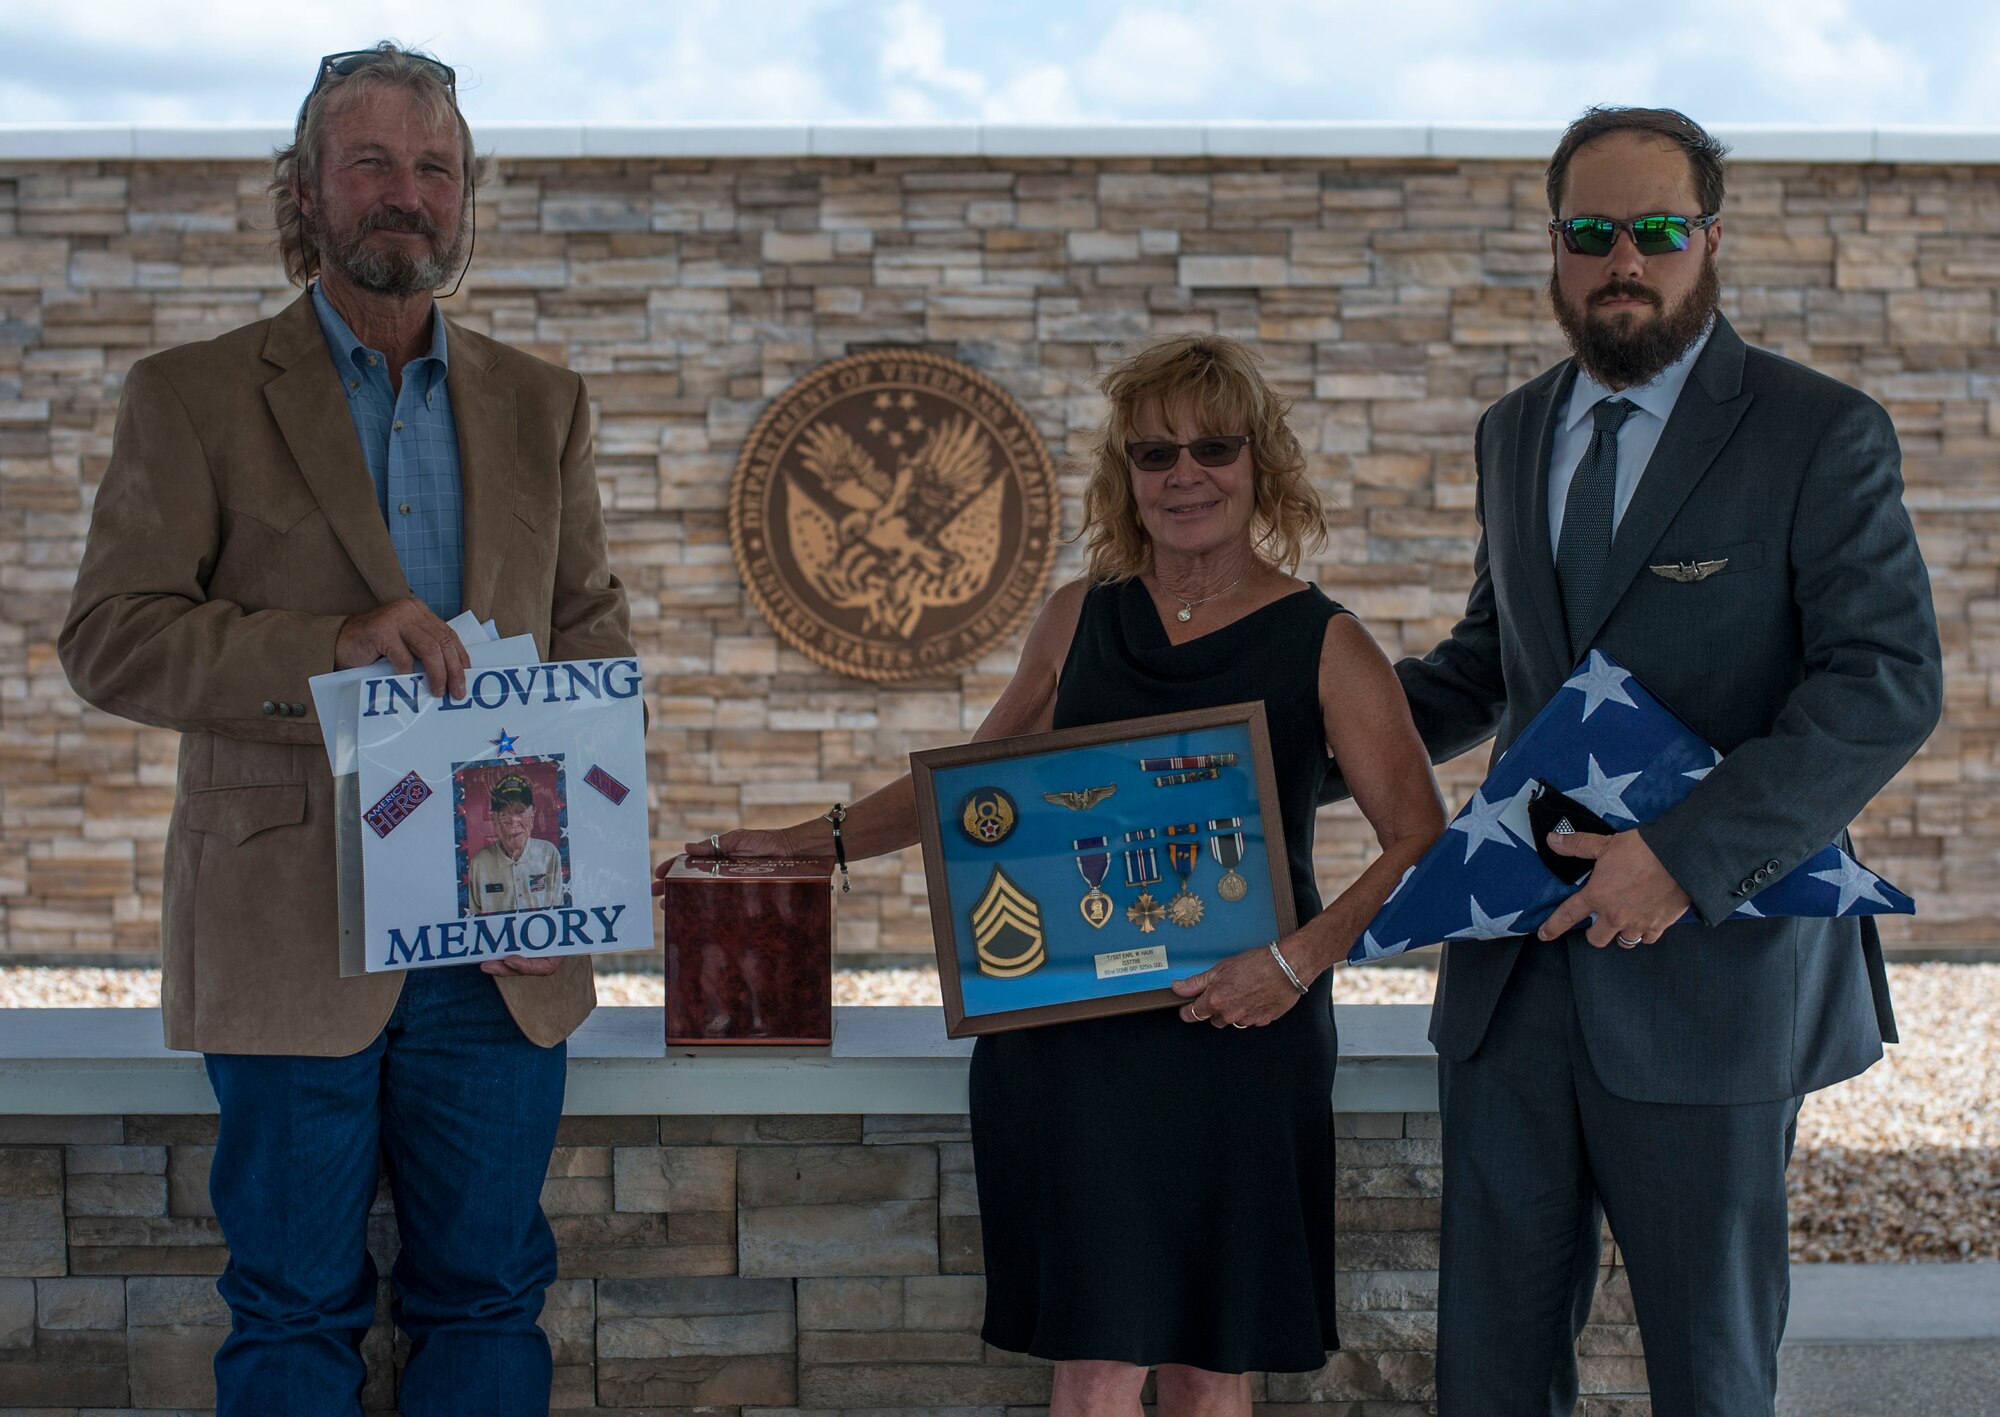 Cathy Haun, center, daughter of Tech. Sgt. Earl W. Haun, displays her father’s shadow box and urn with her husband and son after Earl’s military funeral service at the Sarasota National Cemetery, Oct. 2, 2018.